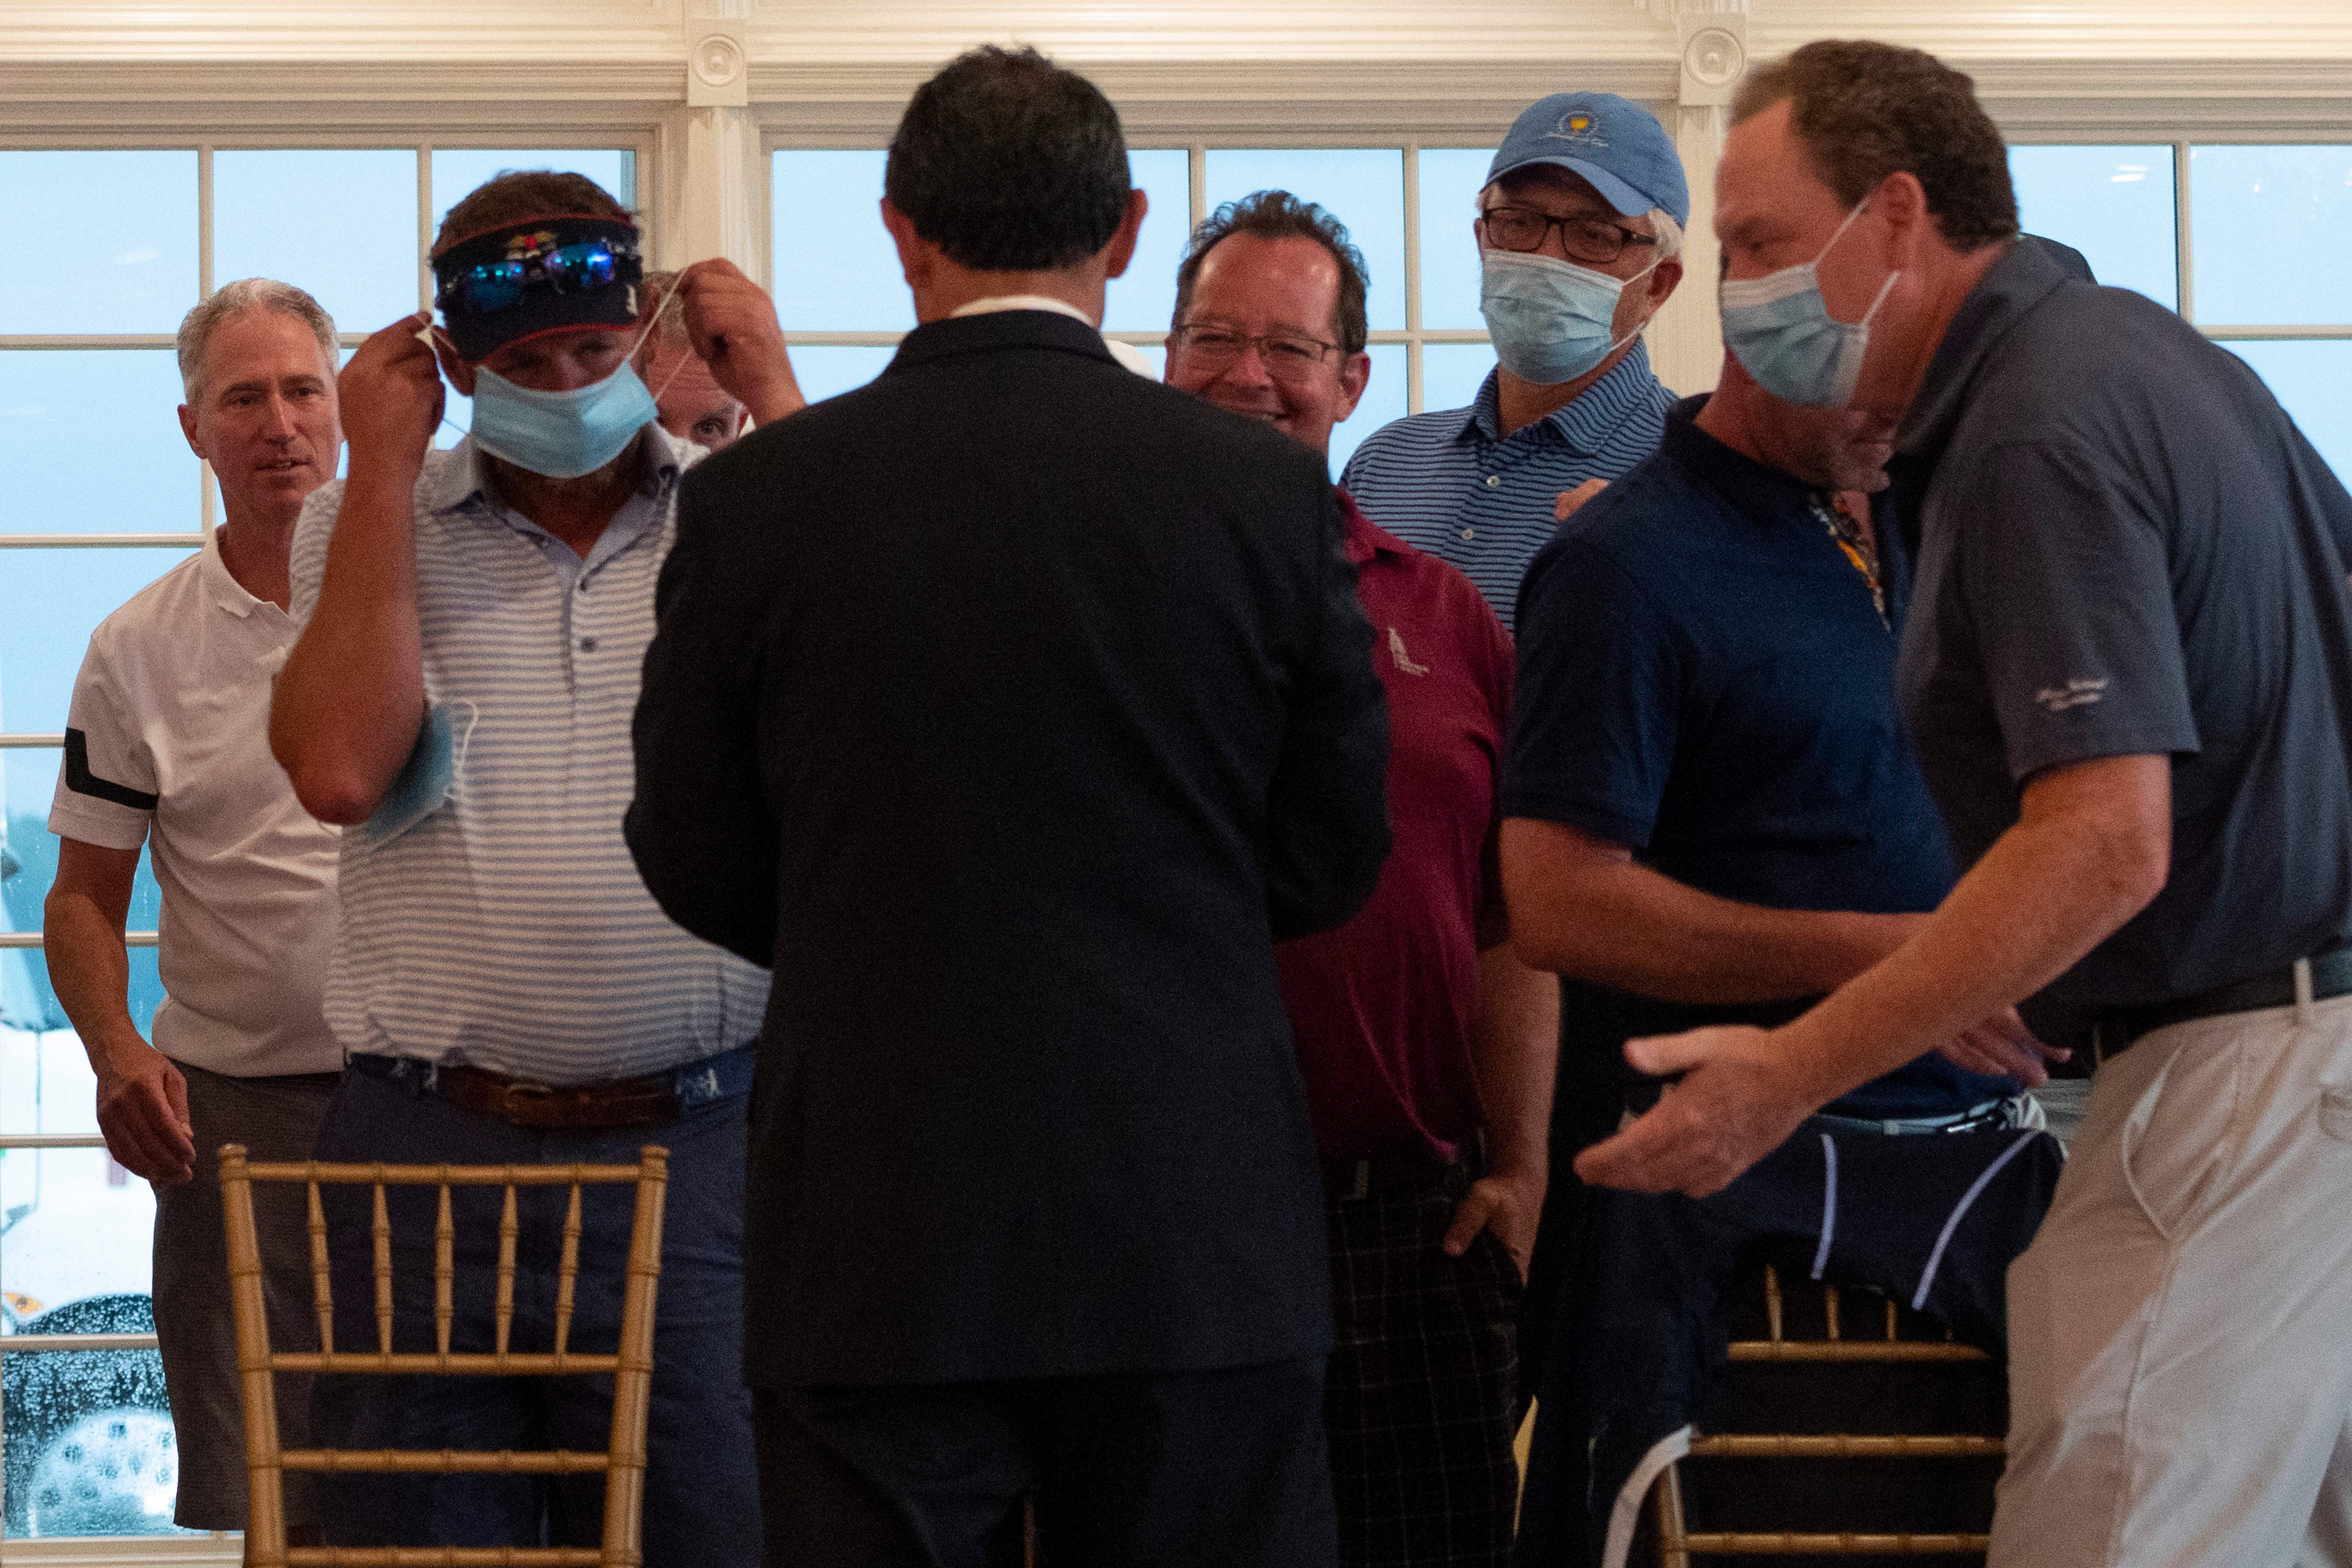 Country club members are handed facemasks to wear as they await the US president's arrival ahead of a news conference in Bedminster, New Jersey, on August 7, 2020.